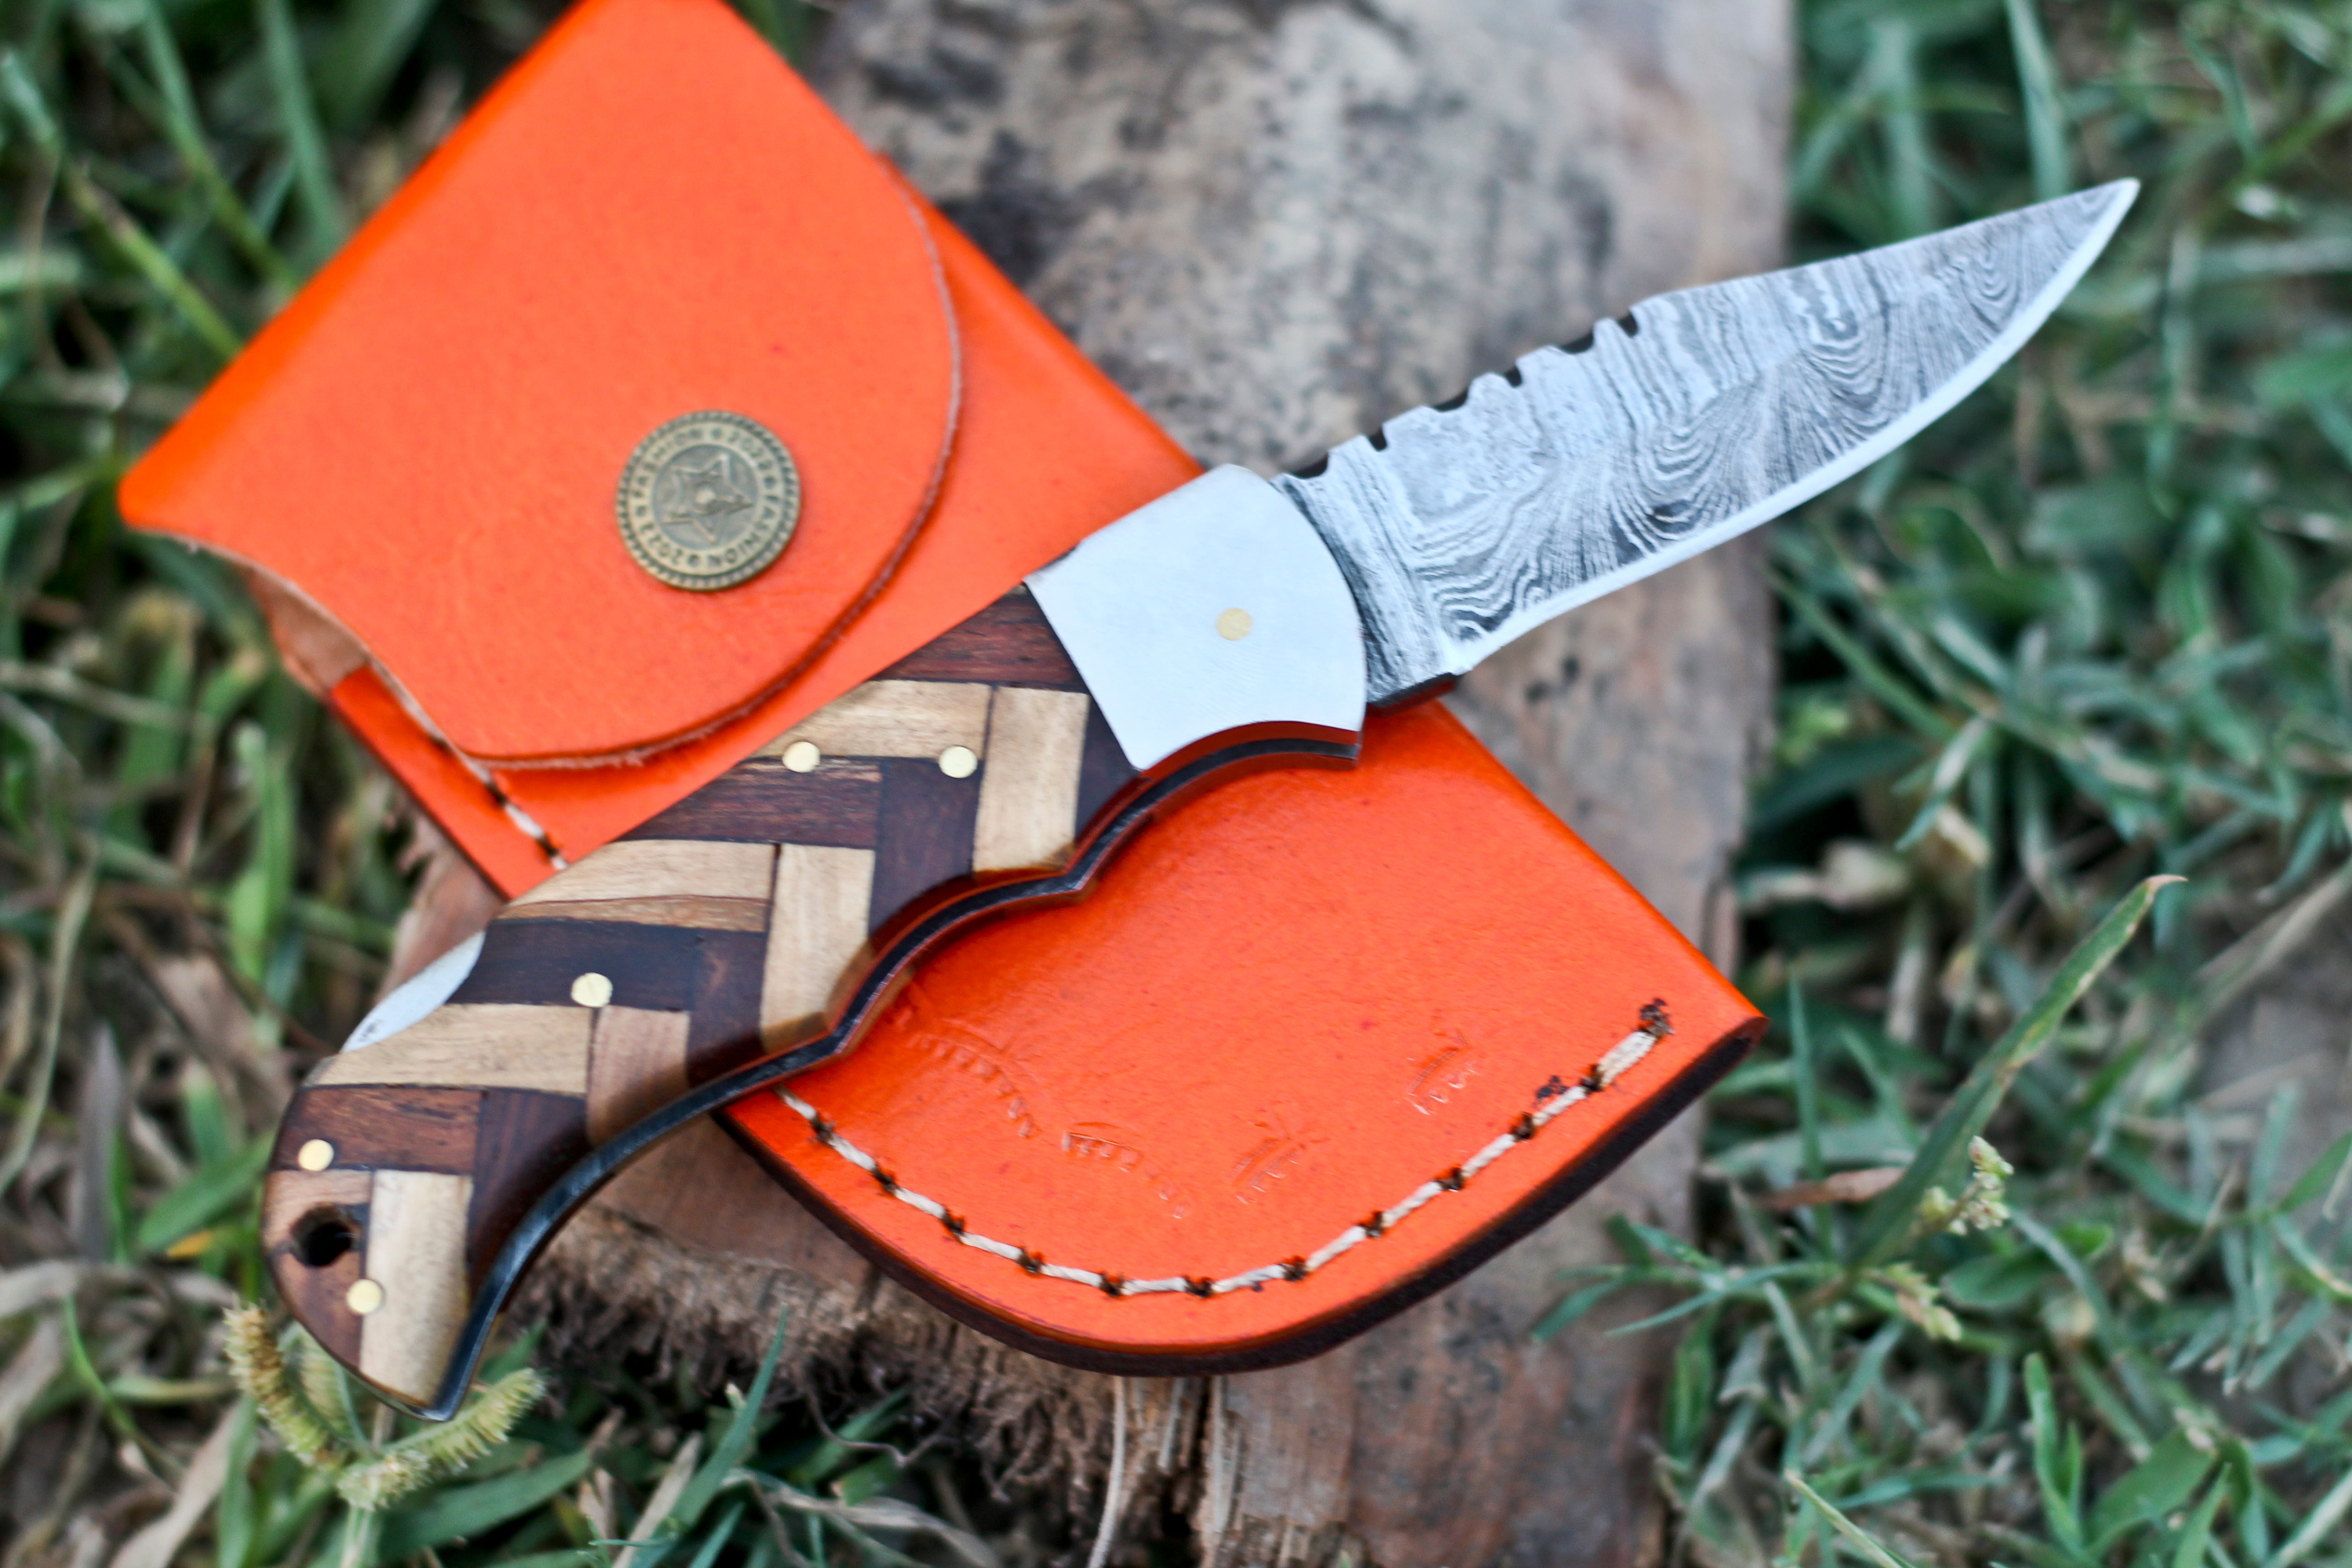 <h3>Handmade Damascus Steel Hunting Pocket Knife Camping Folding Blade With Cocobolo Wood _ Olive Wood Handle</h3>